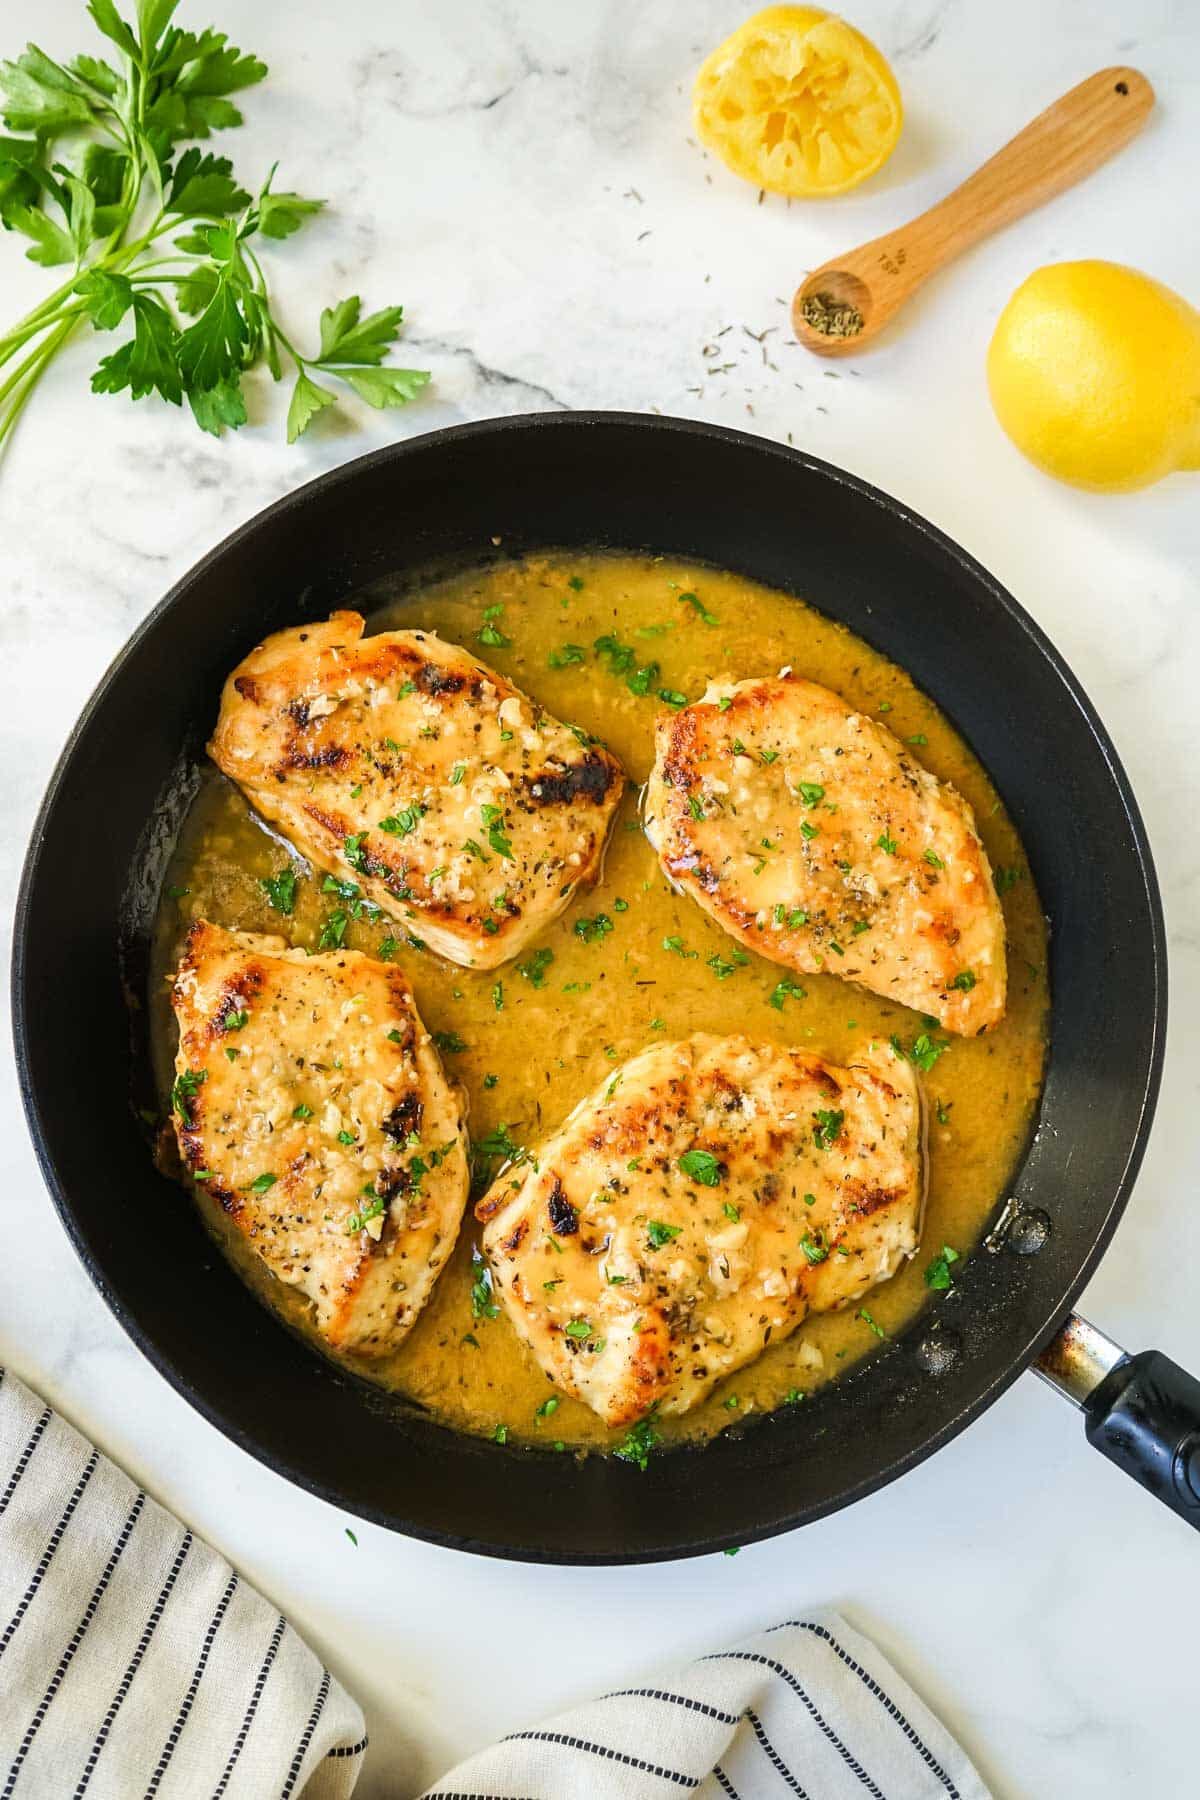 Chicken in white wine sauce in a black pan.